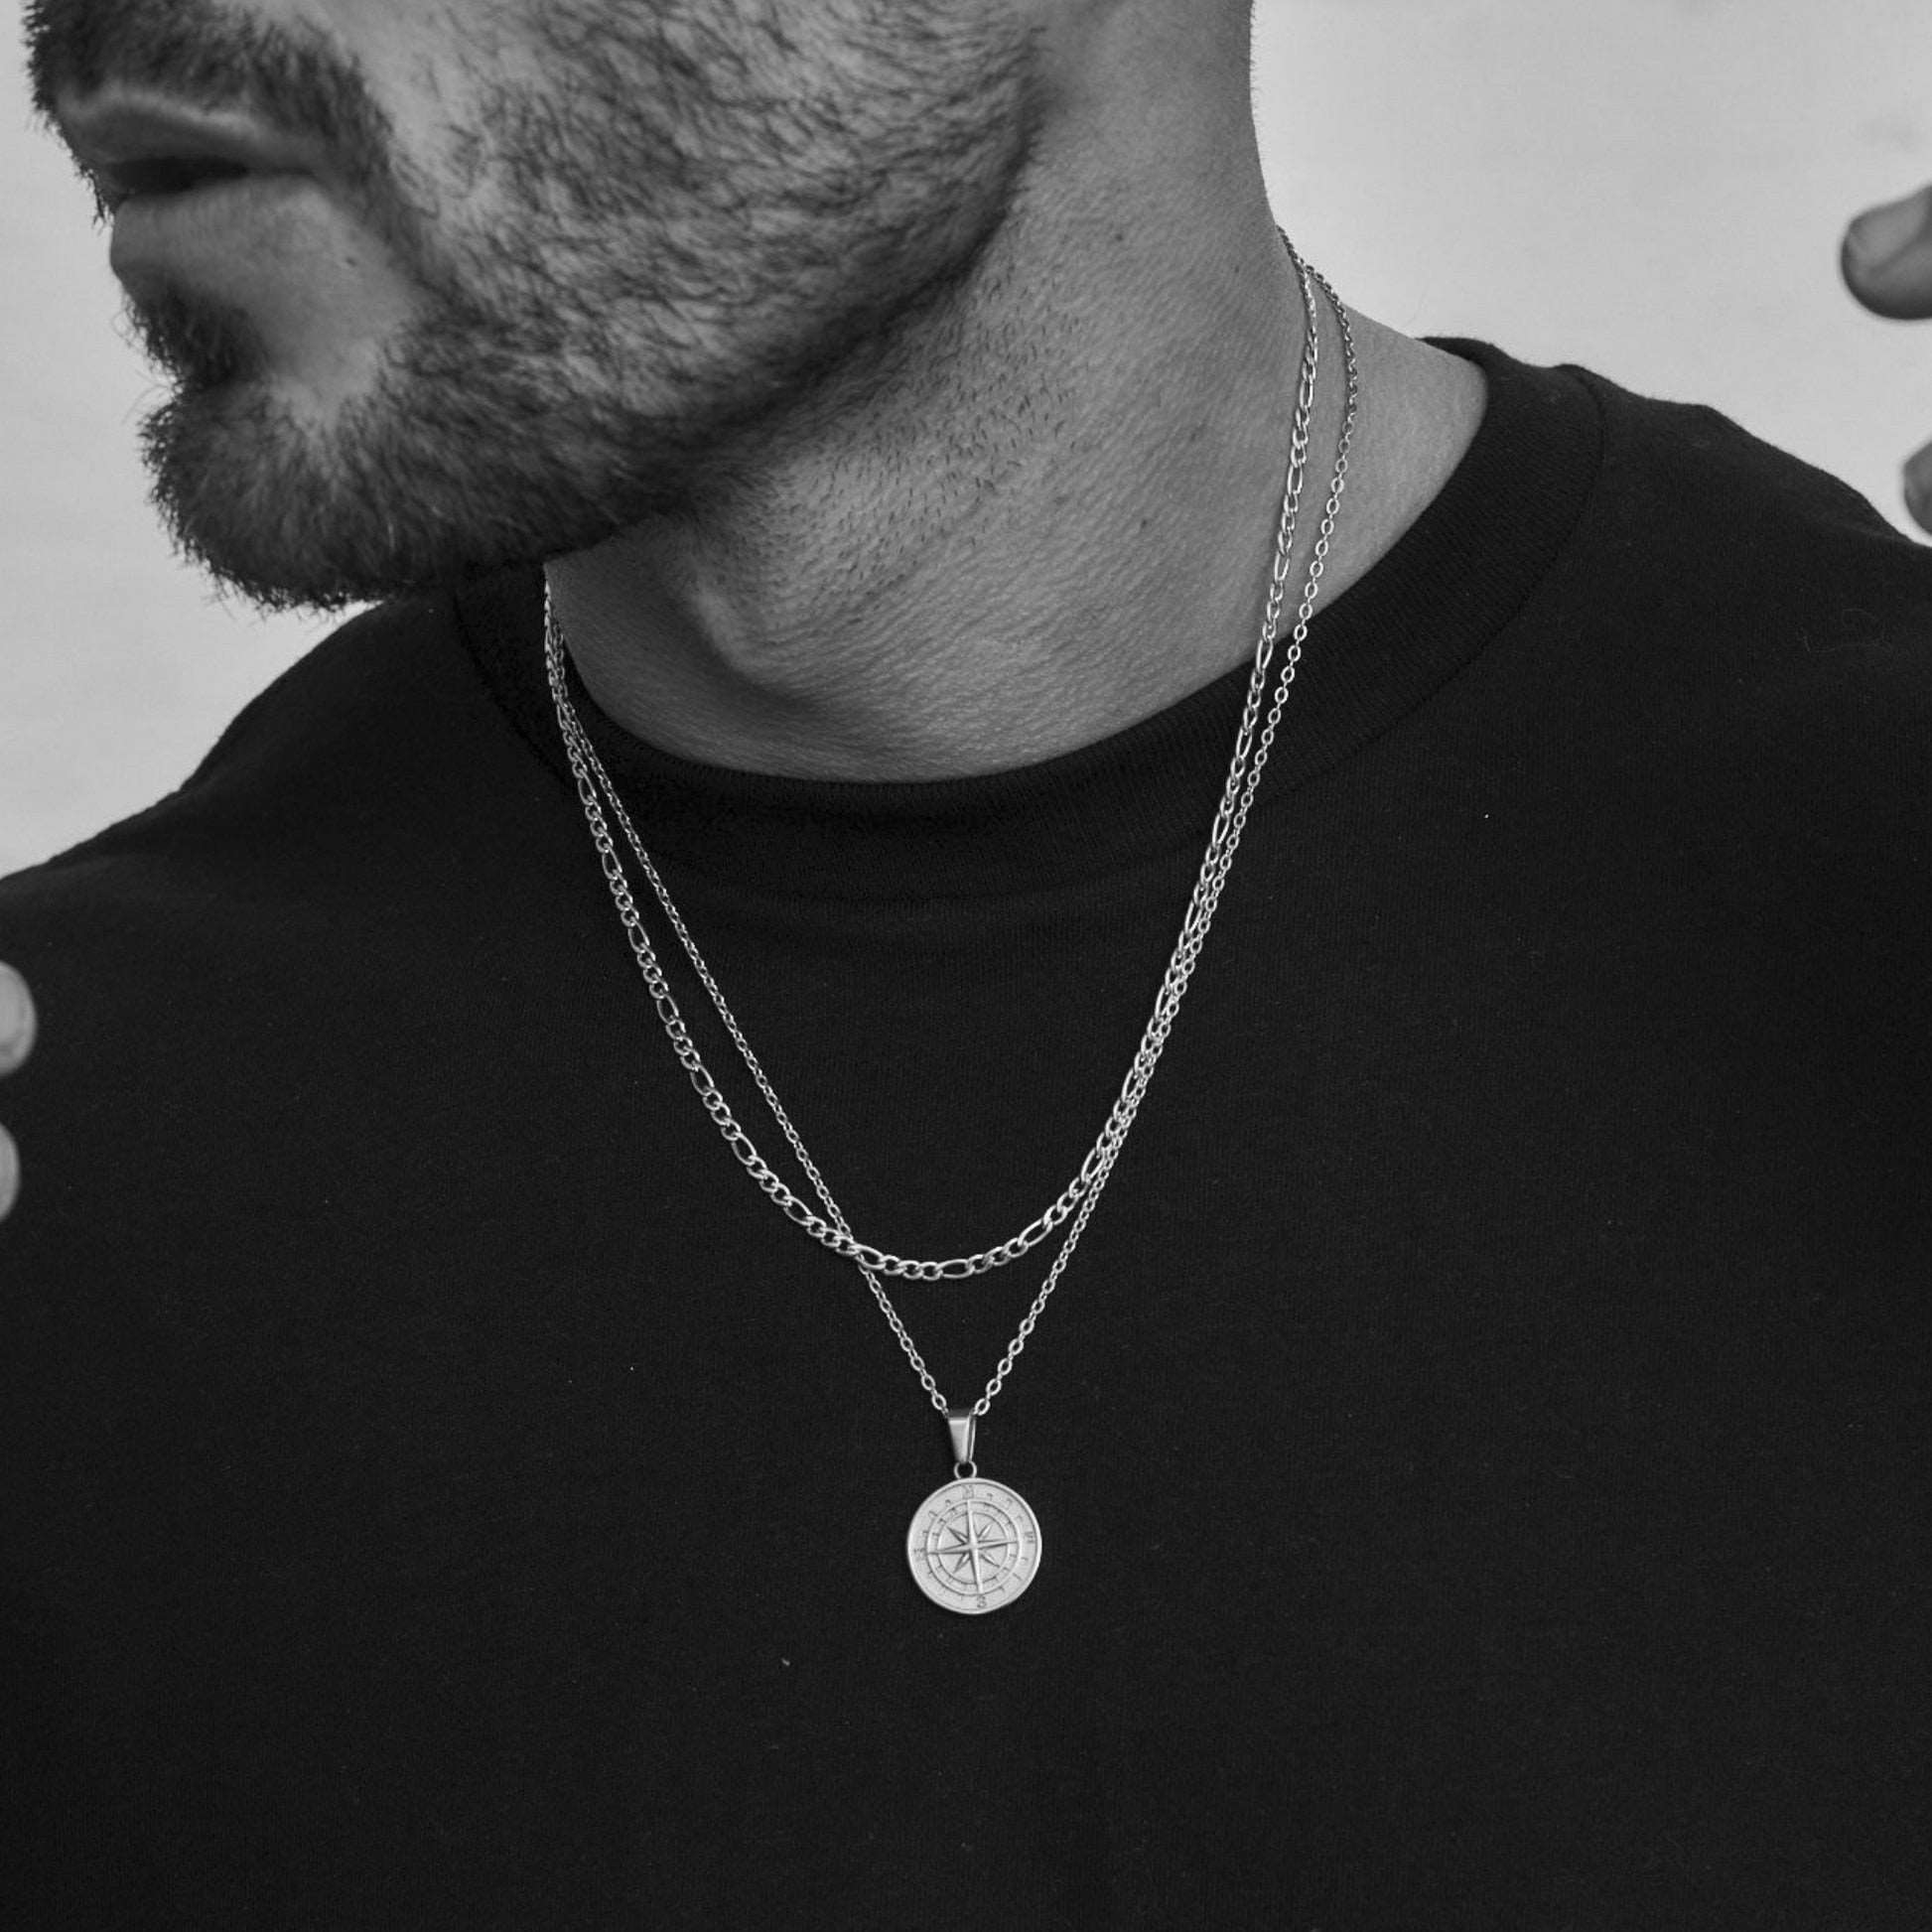 Layered Necklaces for Men, Sailing Travel Compass Pendant Silver Figaro Men's Necklace